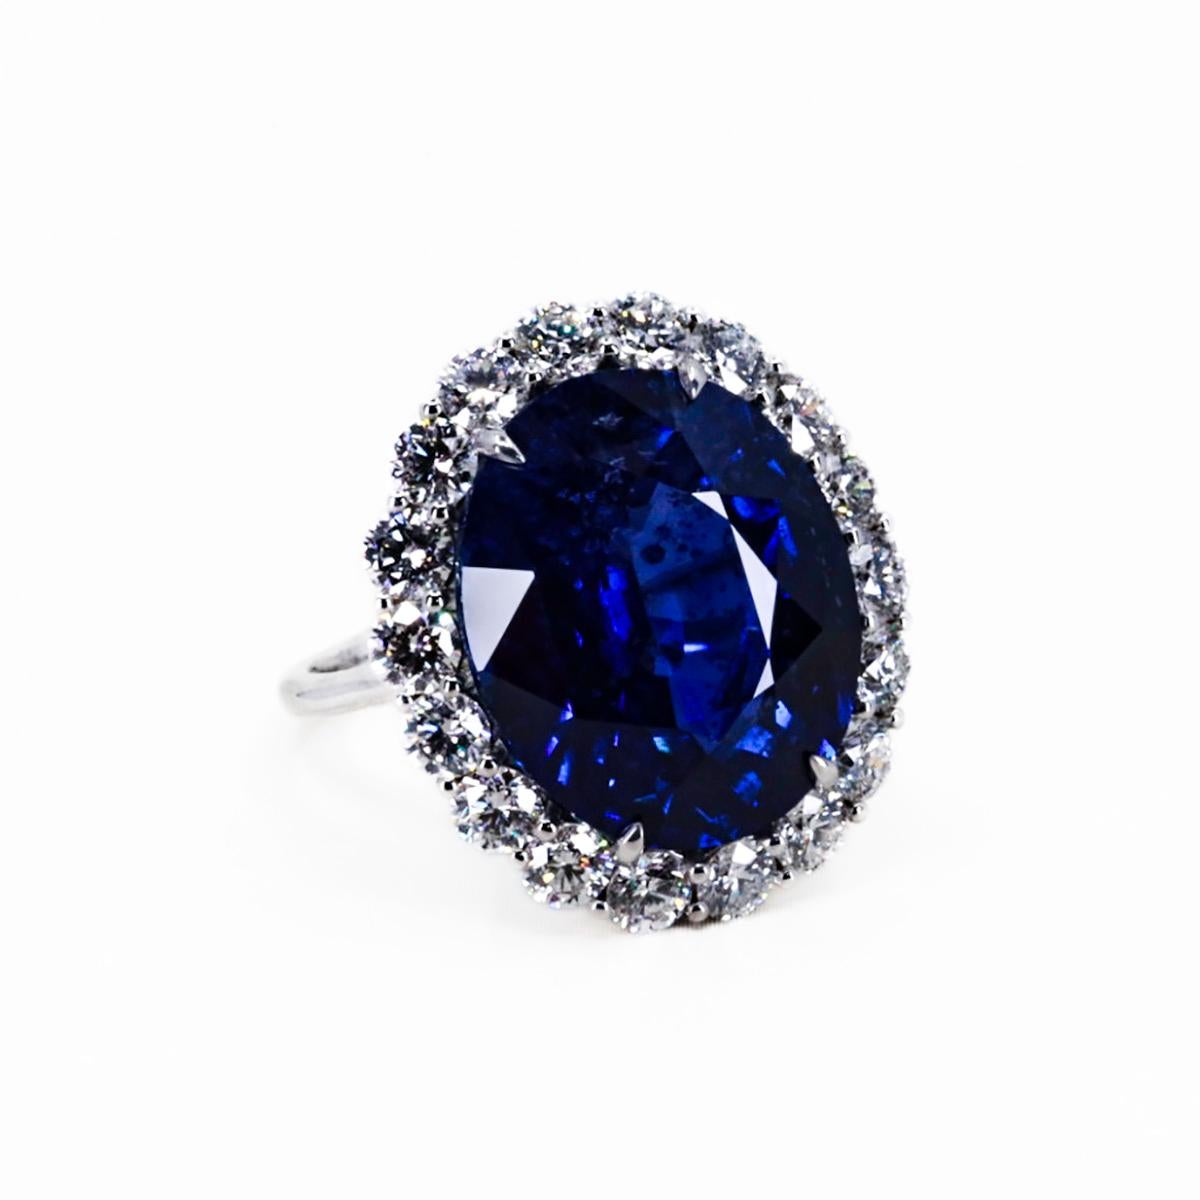 Top Gem 20.12 carat, vivid royal blue Ceylon sapphire set in platinum mounting with 2.65 carats of collection color/clarity round brilliant diamonds